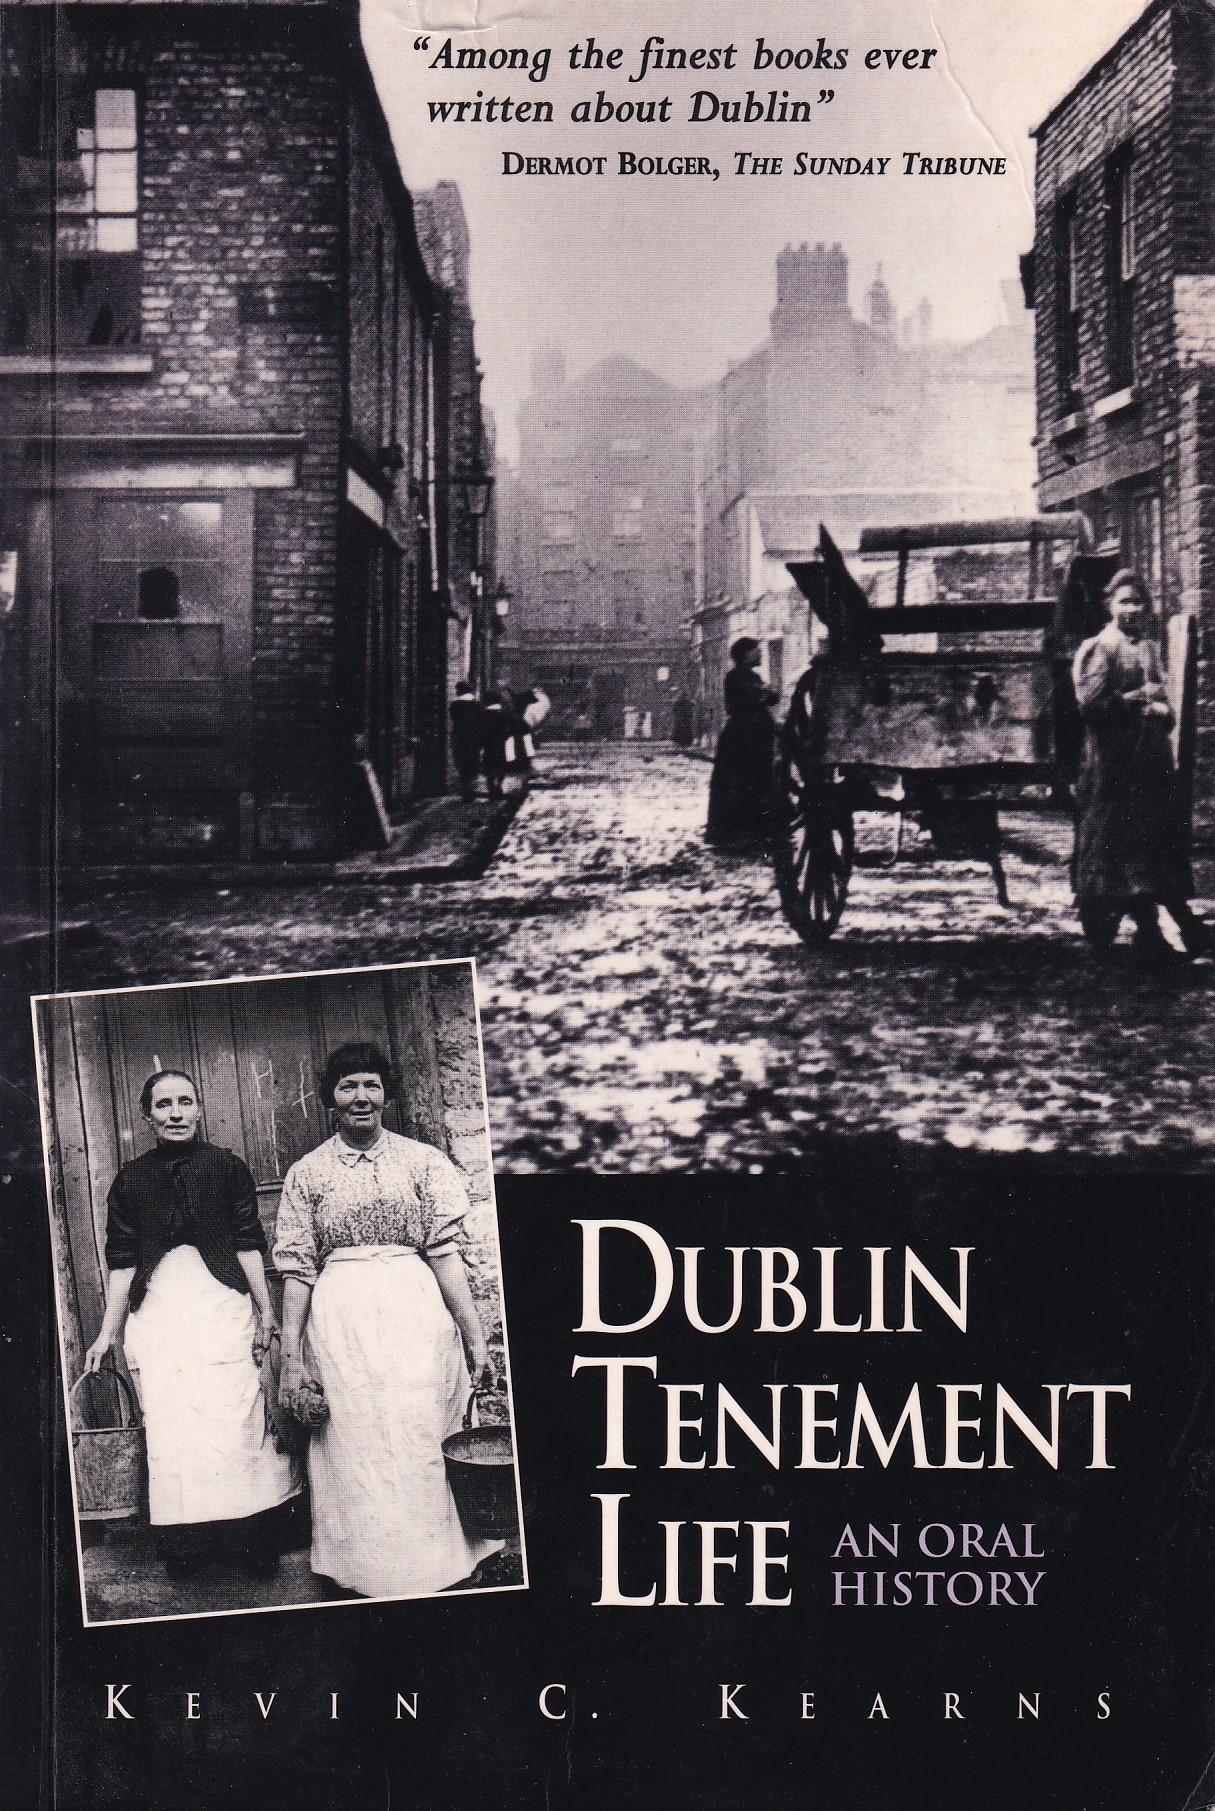 Dublin Tenement Life: An Oral History | Kevin C. Kearns | Charlie Byrne's